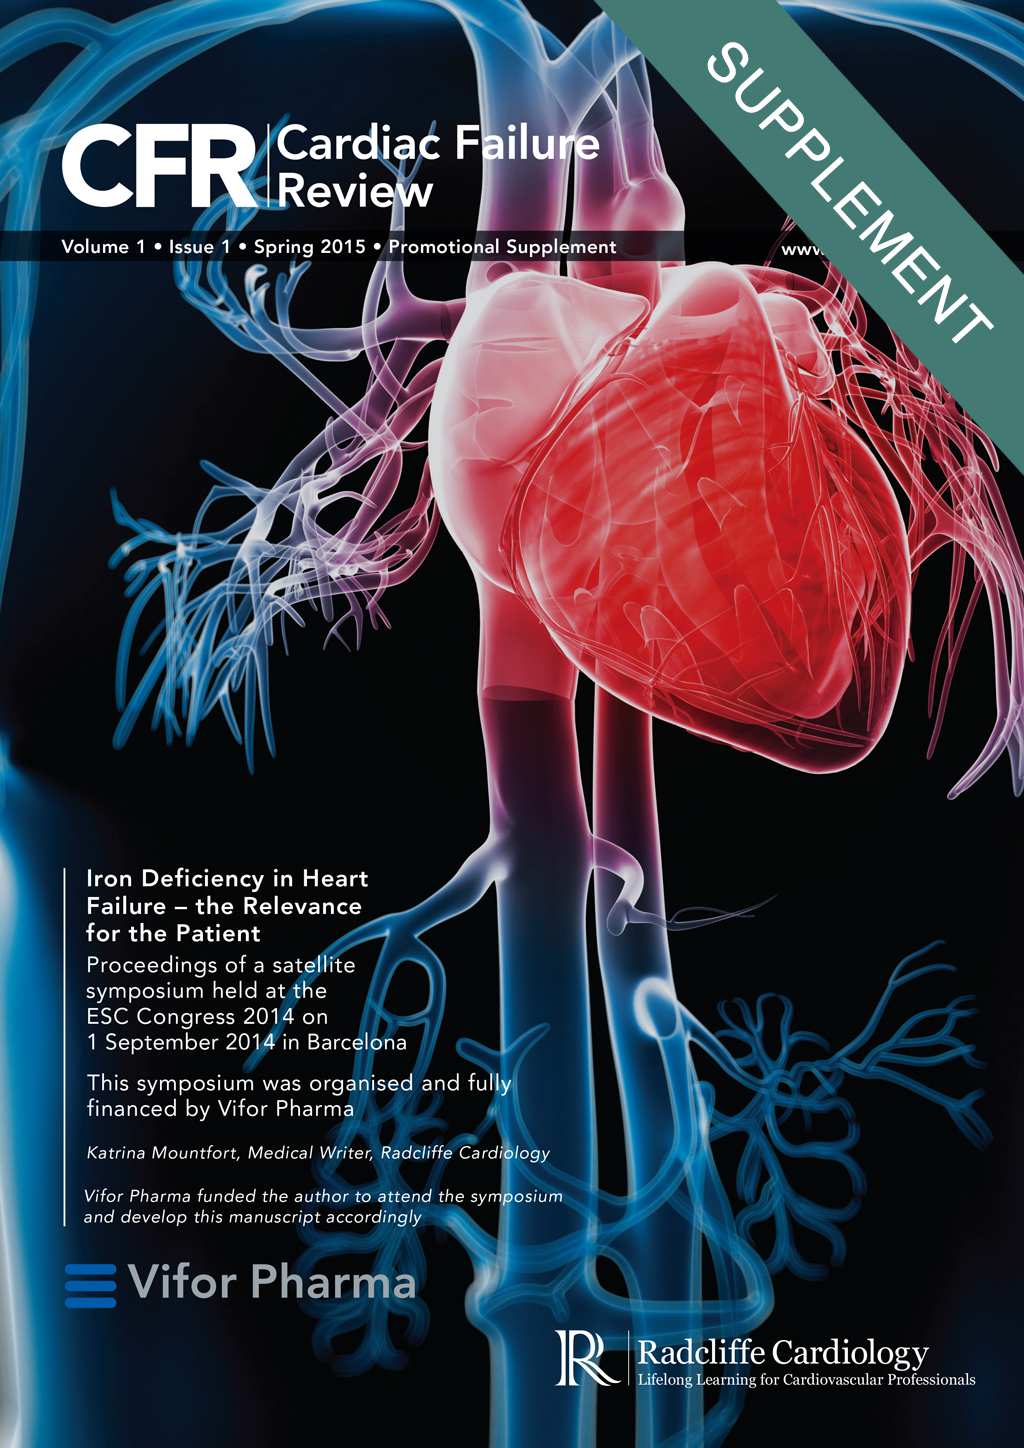 Iron Deficiency in Heart Failure – the Relevance for the Patient